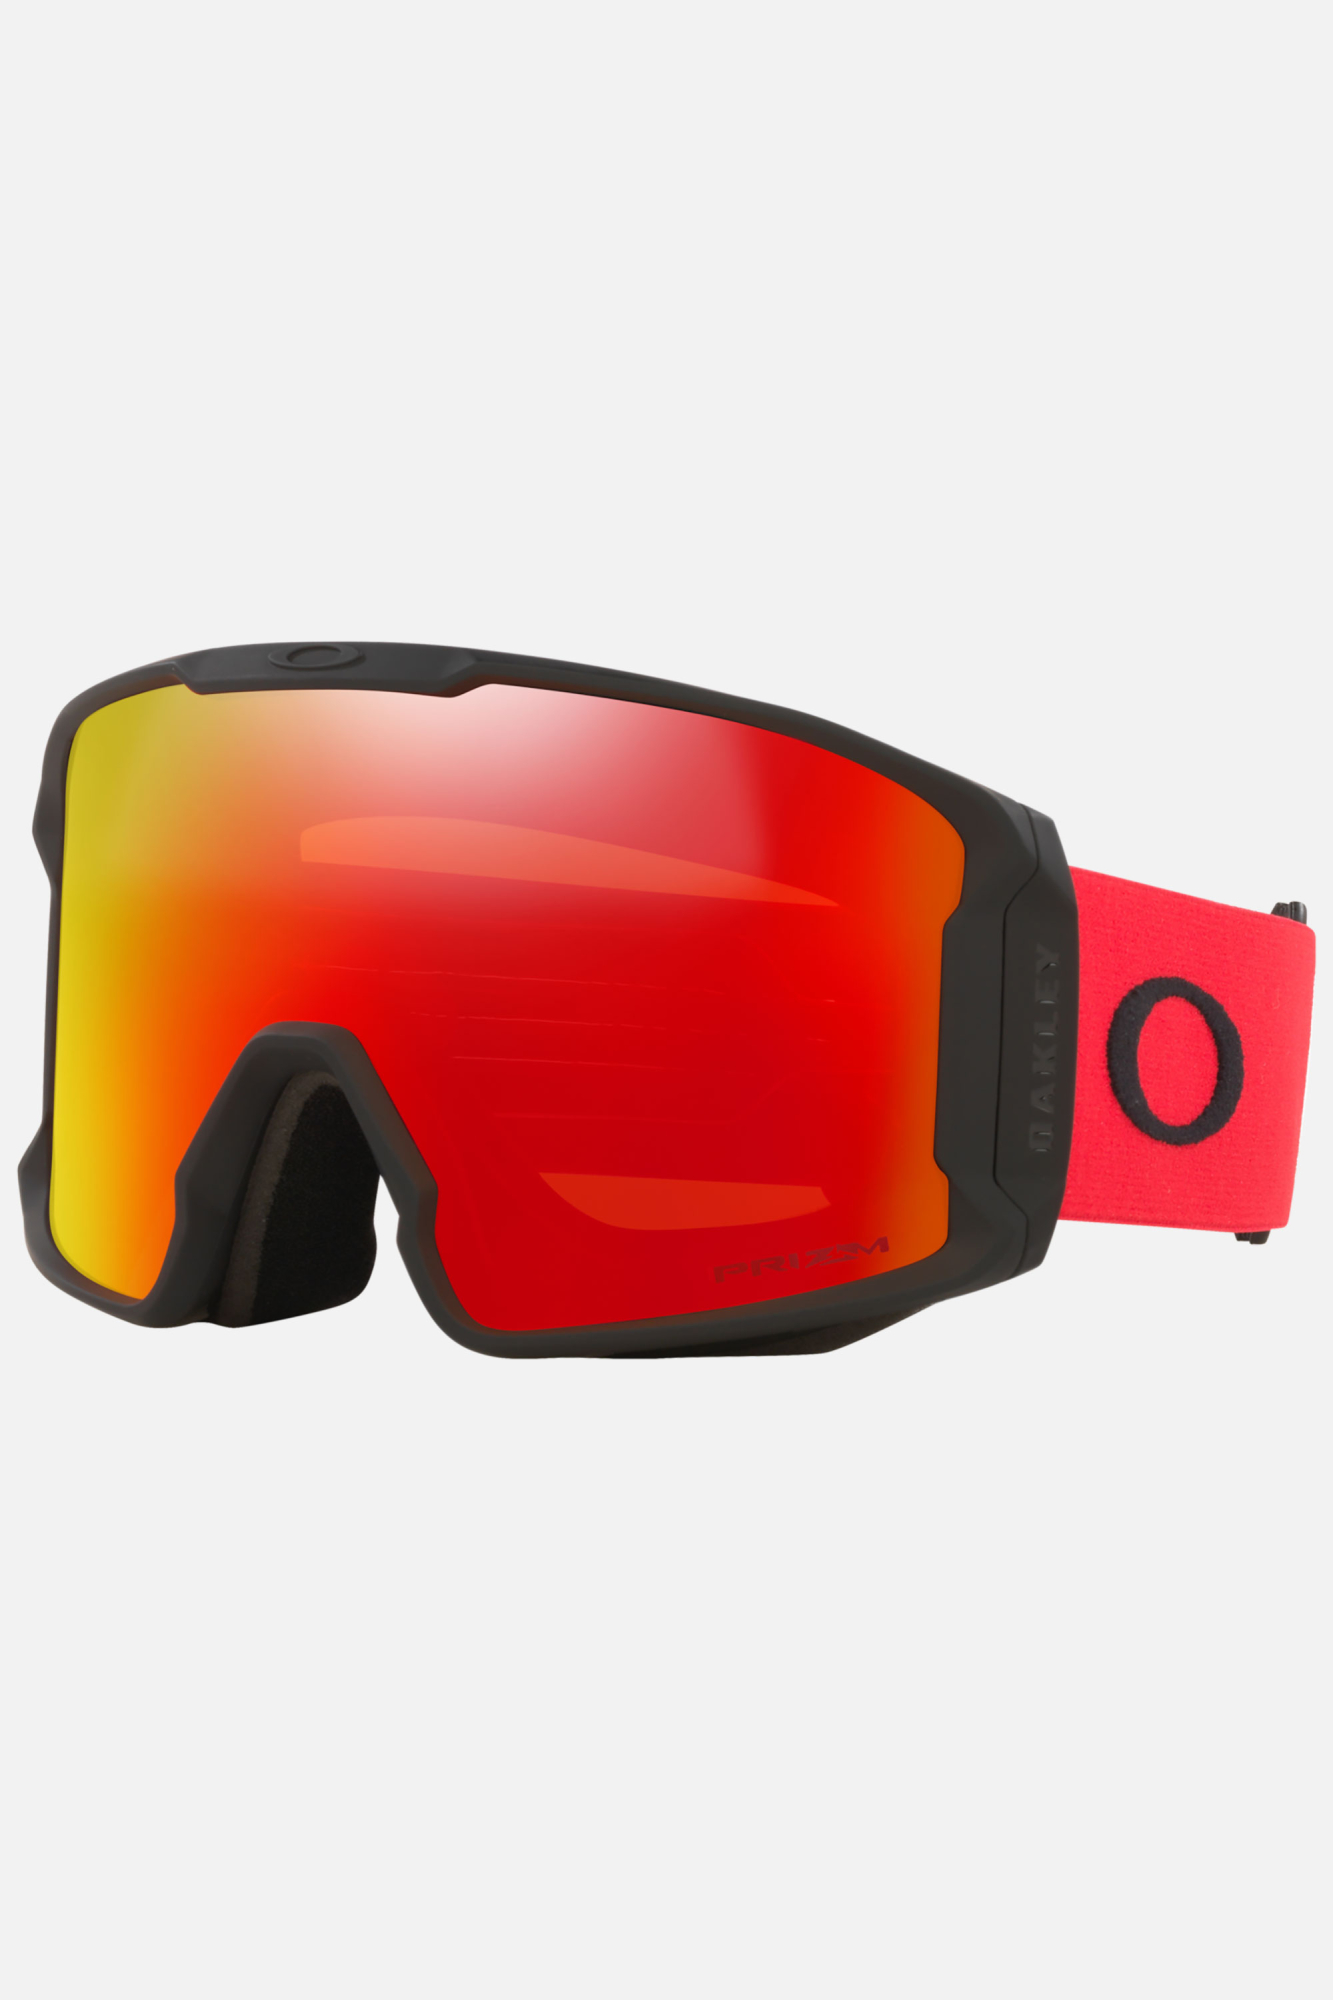 Oakley Line Miner Goggles Black - Size: ONE